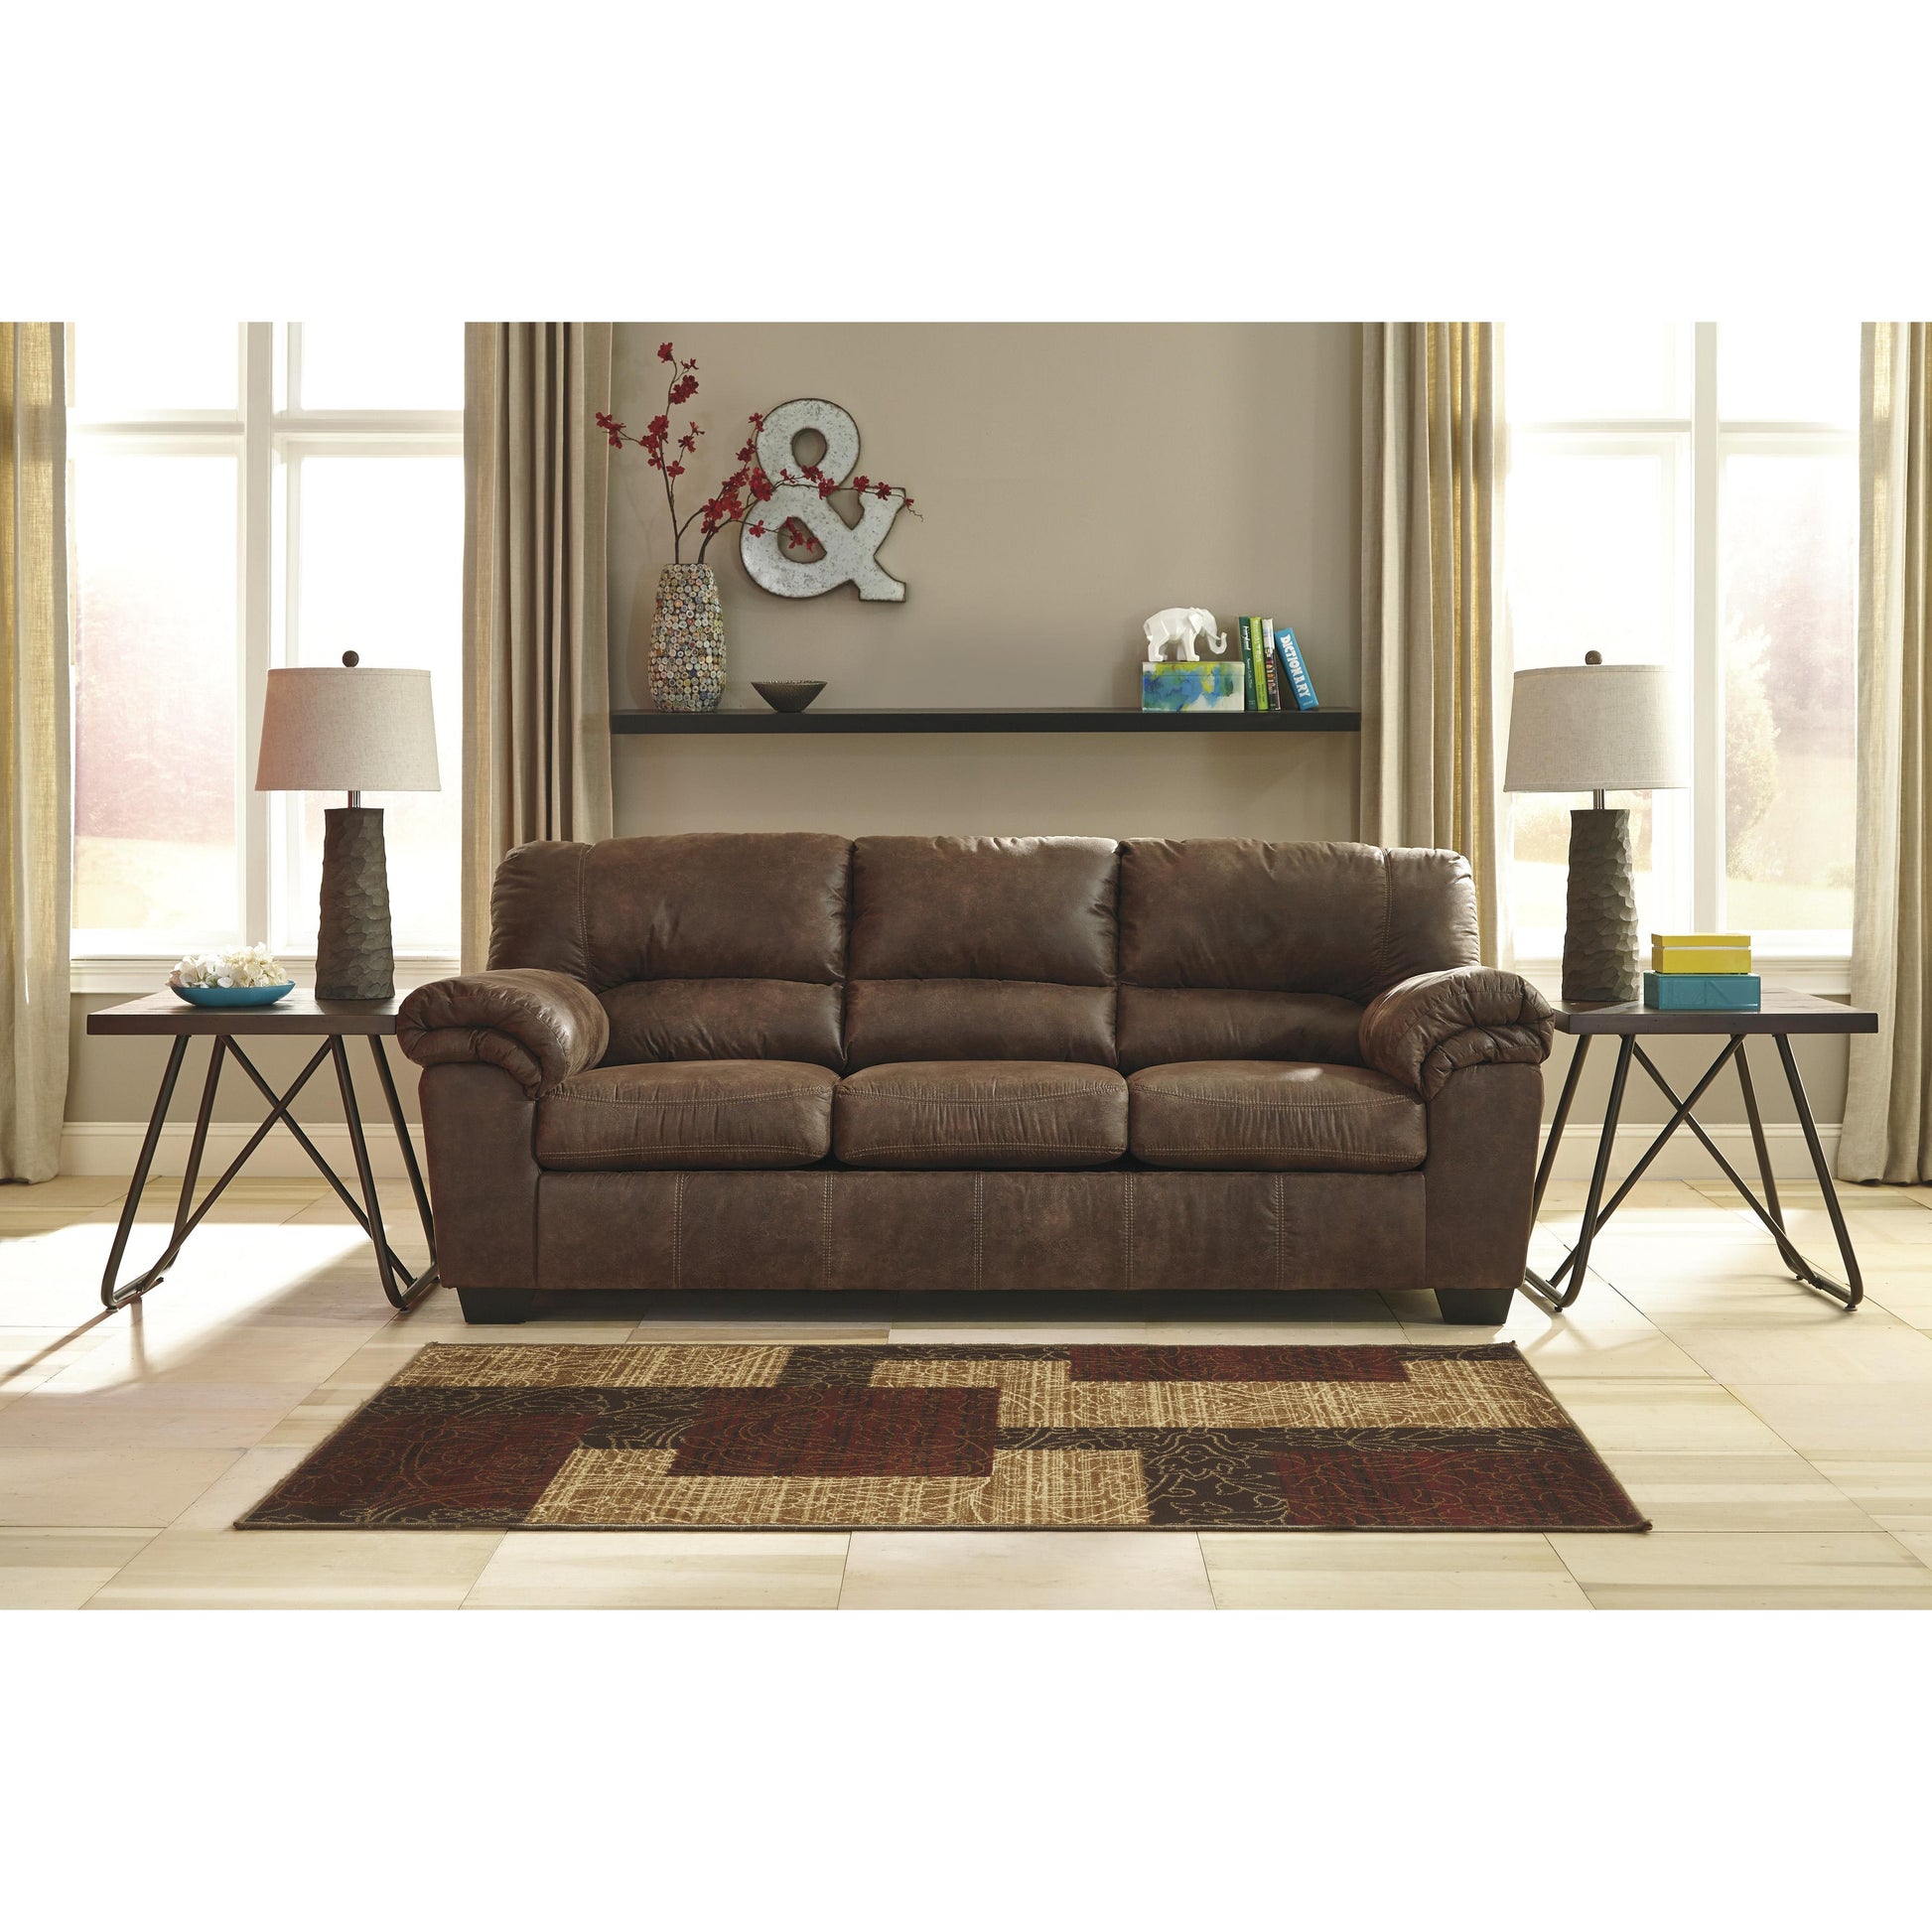 Signature Design by Ashley Bladen Leather Look Full Sofabed 1202036